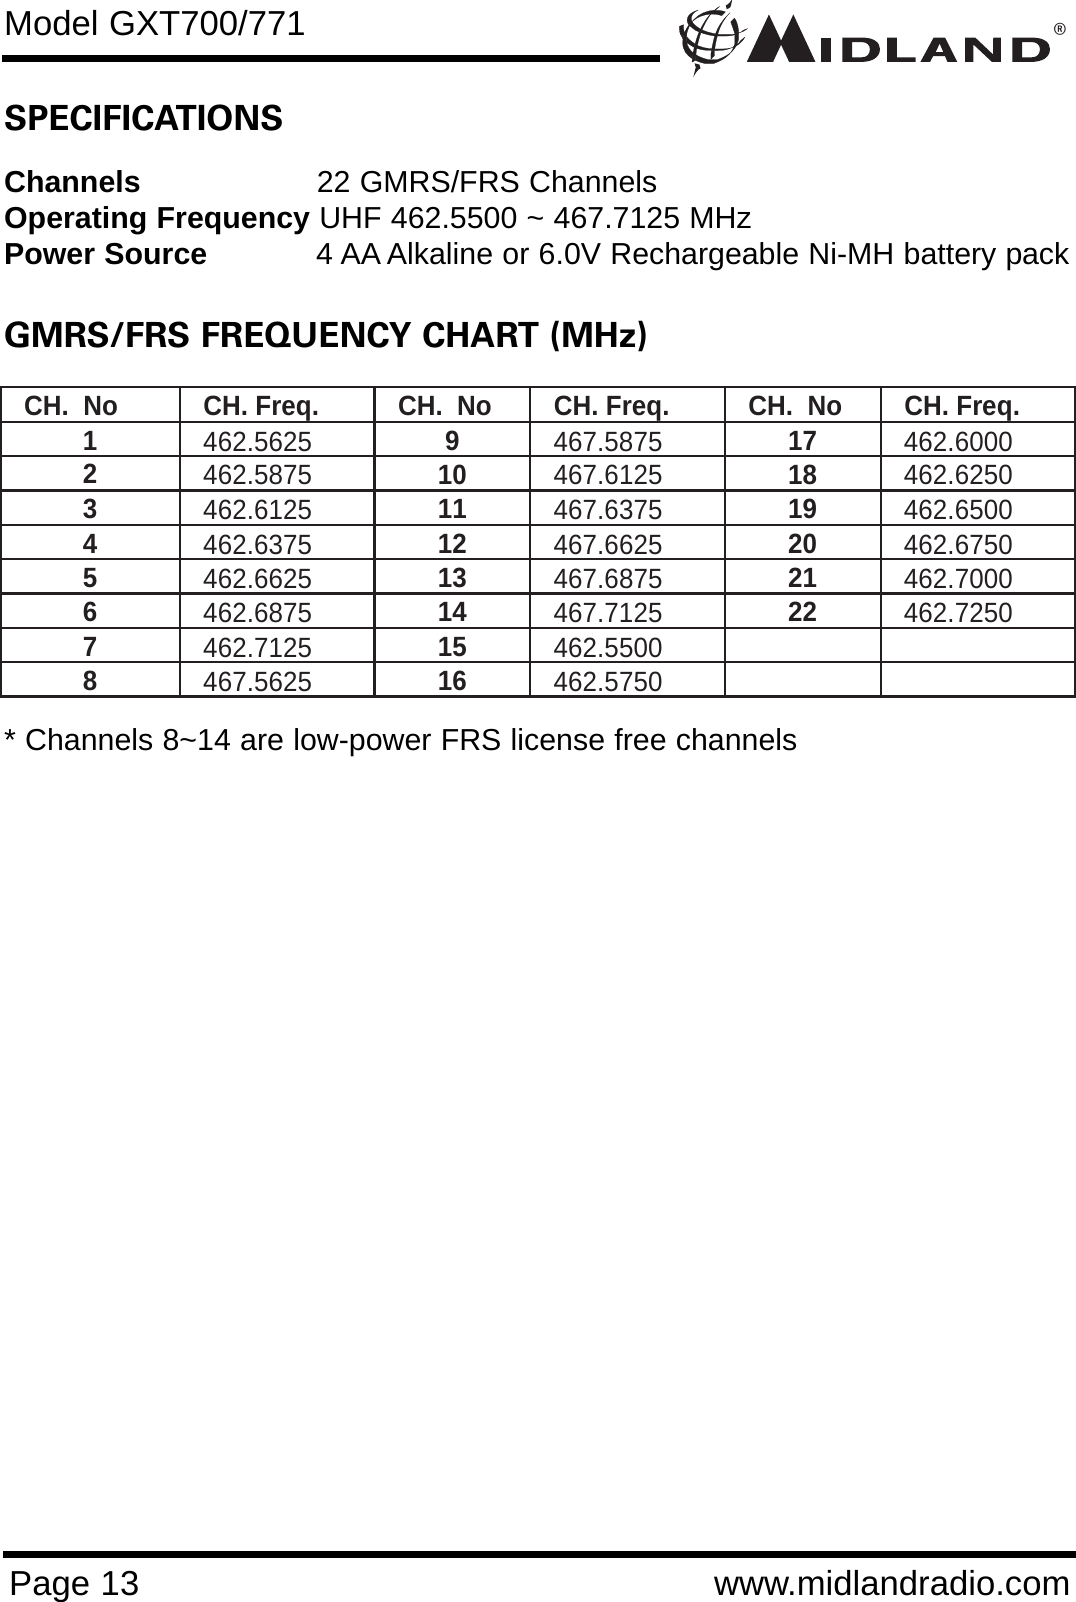 ®Page 13 www.midlandradio.comSPECIFICATIONSChannels 22 GMRS/FRS Channels Operating Frequency UHF 462.5500 ~ 467.7125 MHzPower Source 4 AA Alkaline or 6.0V Rechargeable Ni-MH battery packGMRS/FRS FREQUENCY CHART (MHz)CH.  No  CH. Freq.  CH.  No  CH. Freq.  CH.  No  CH. Freq. 1  462.5625 9  467.5875 17  462.6000 2  462.5875 10  467.6125 18  462.6250 3  462.6125 11  467.6375 19  462.6500 4  462.6375 12  467.6625 20  462.6750 5  462.6625 13  467.6875 21  462.7000 6  462.6875 14  467.7125 22  462.7250 7  462.7125 15  462.5500   8  467.5625 16  462.5750   * Channels 8~14 are low-power FRS license free channelsModel GXT700/771